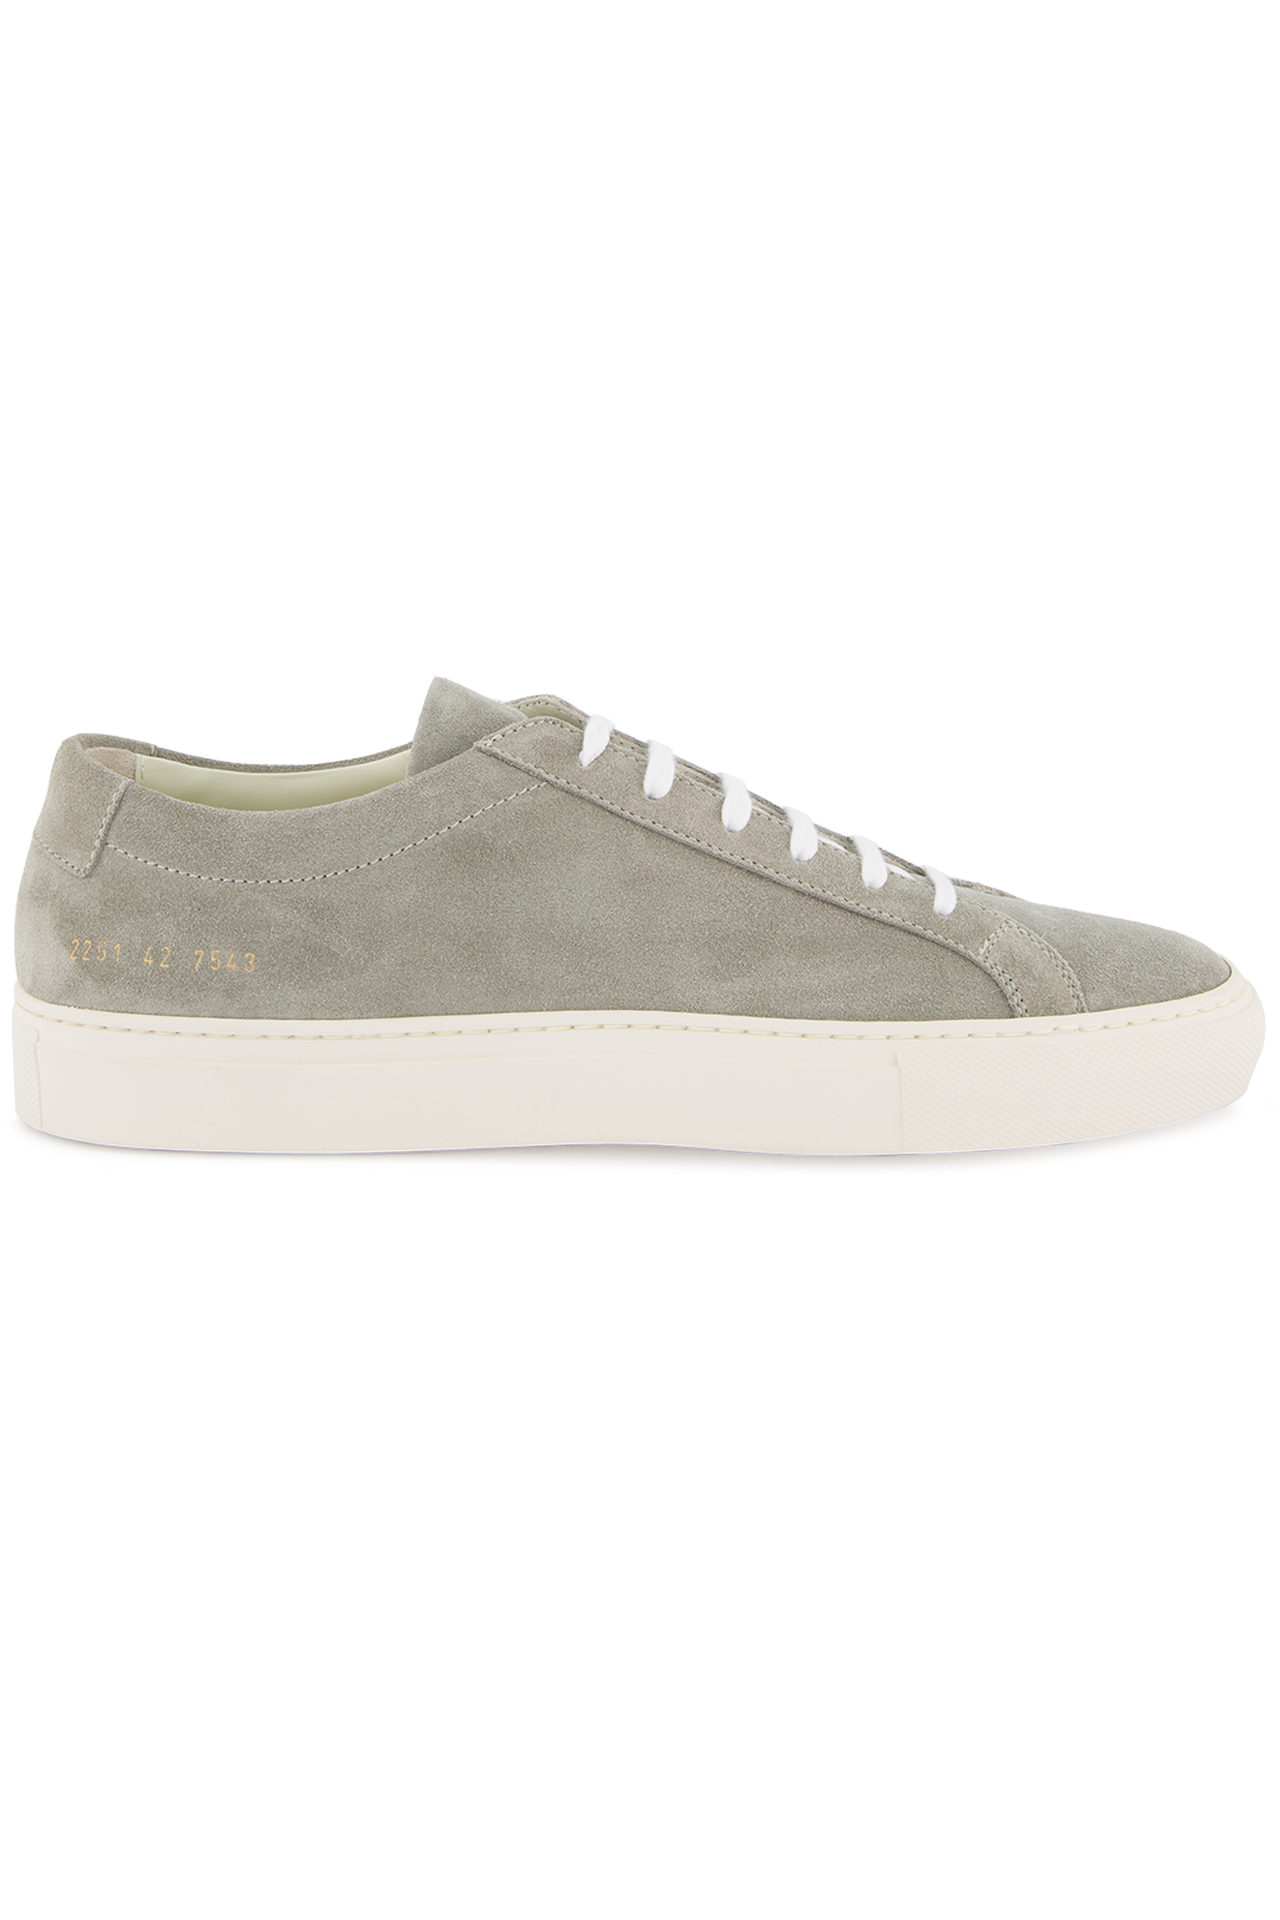 common projects suede grey